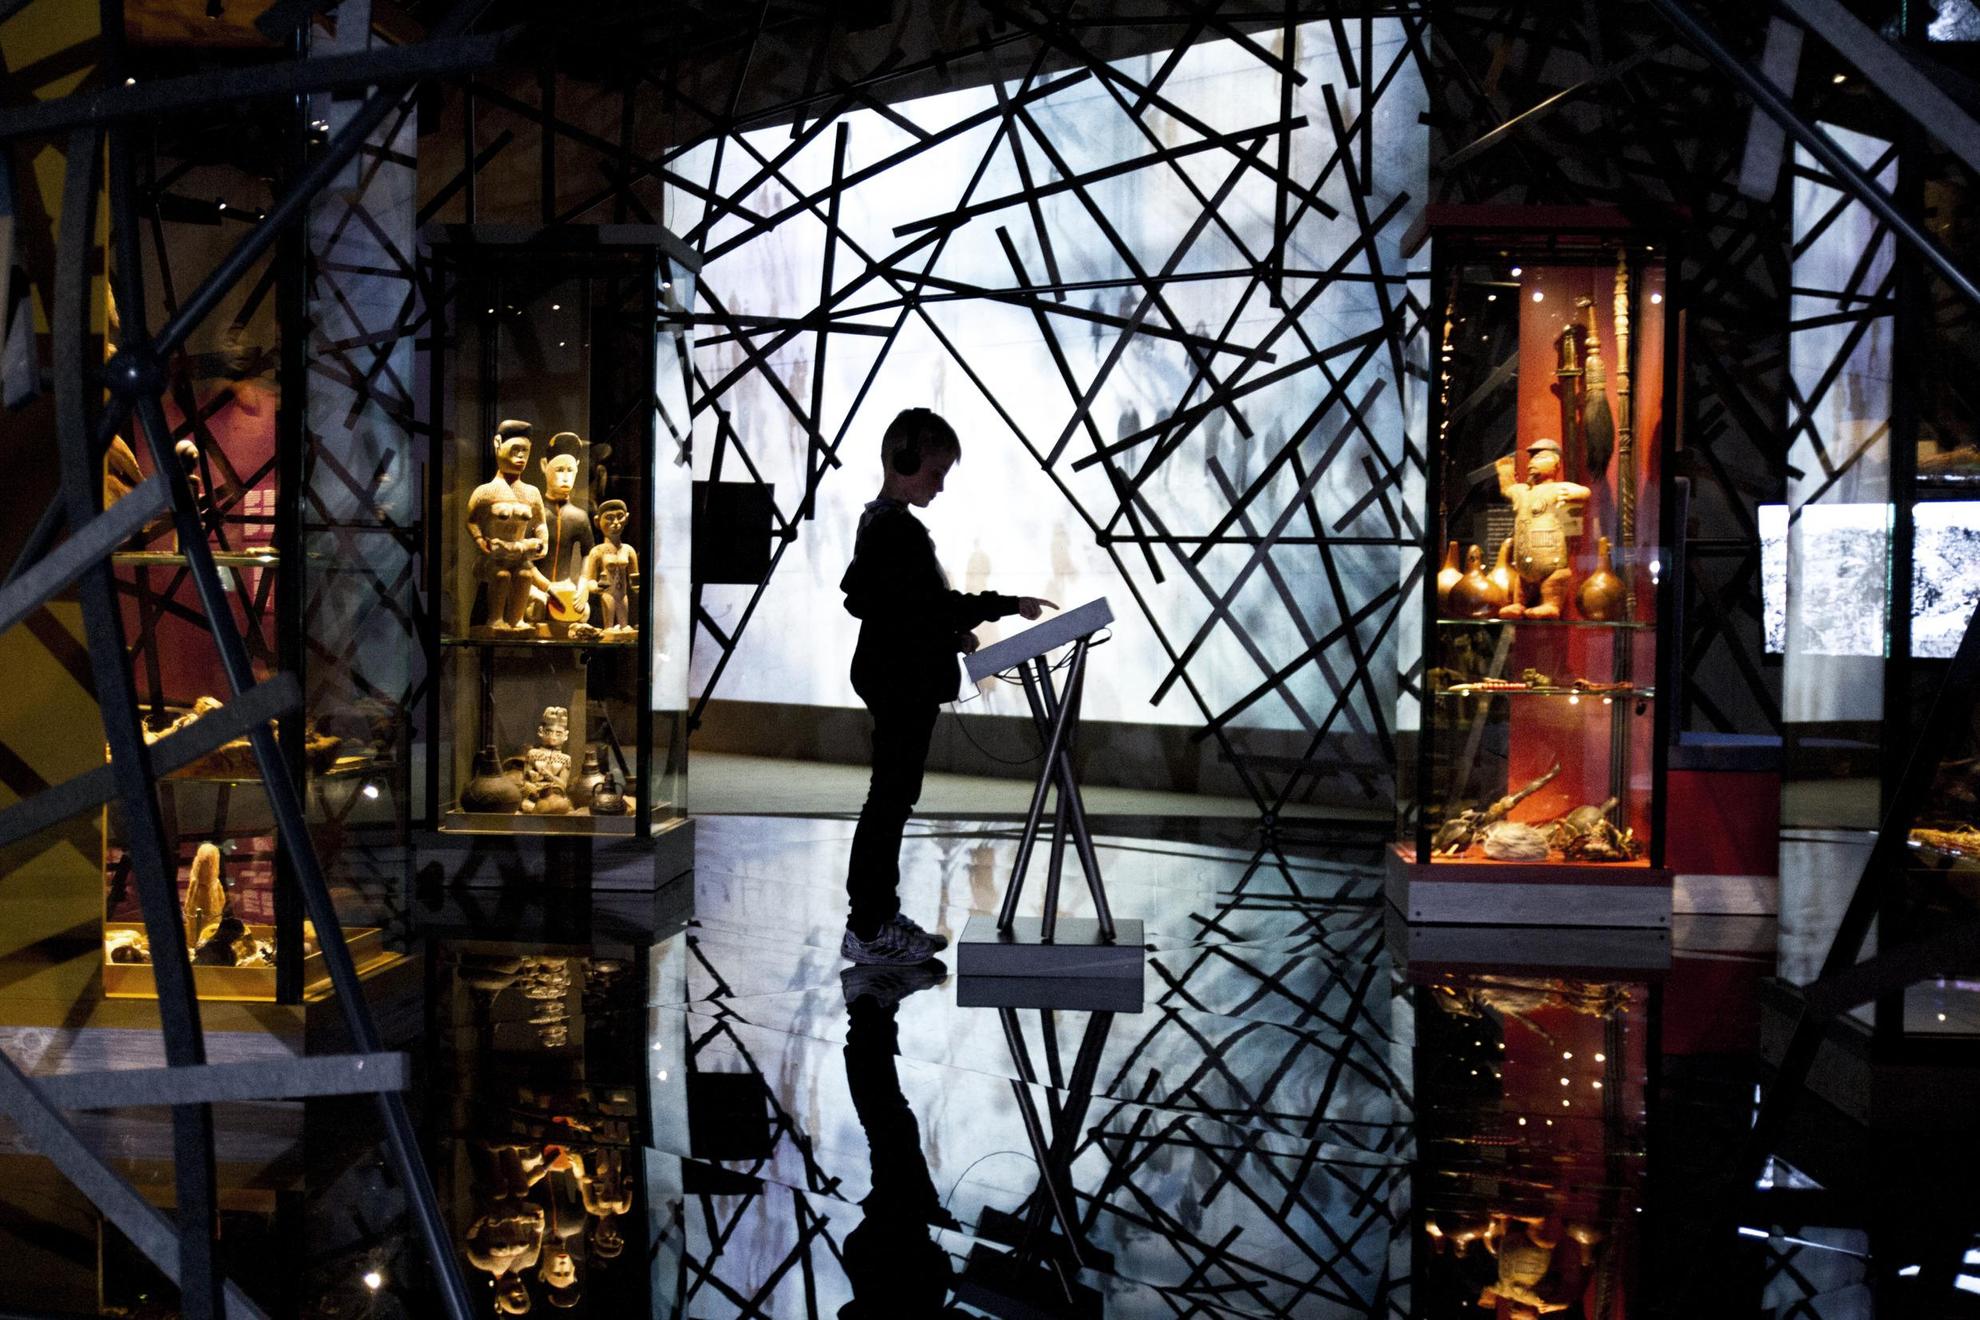 A child is standing in front of a display in the middle of an exhibition room. The room is dark but illuminated by a large screen in the back, surrounded by crossing sticks, which creates a dramatic effect with the visitors silhouette in the middle.